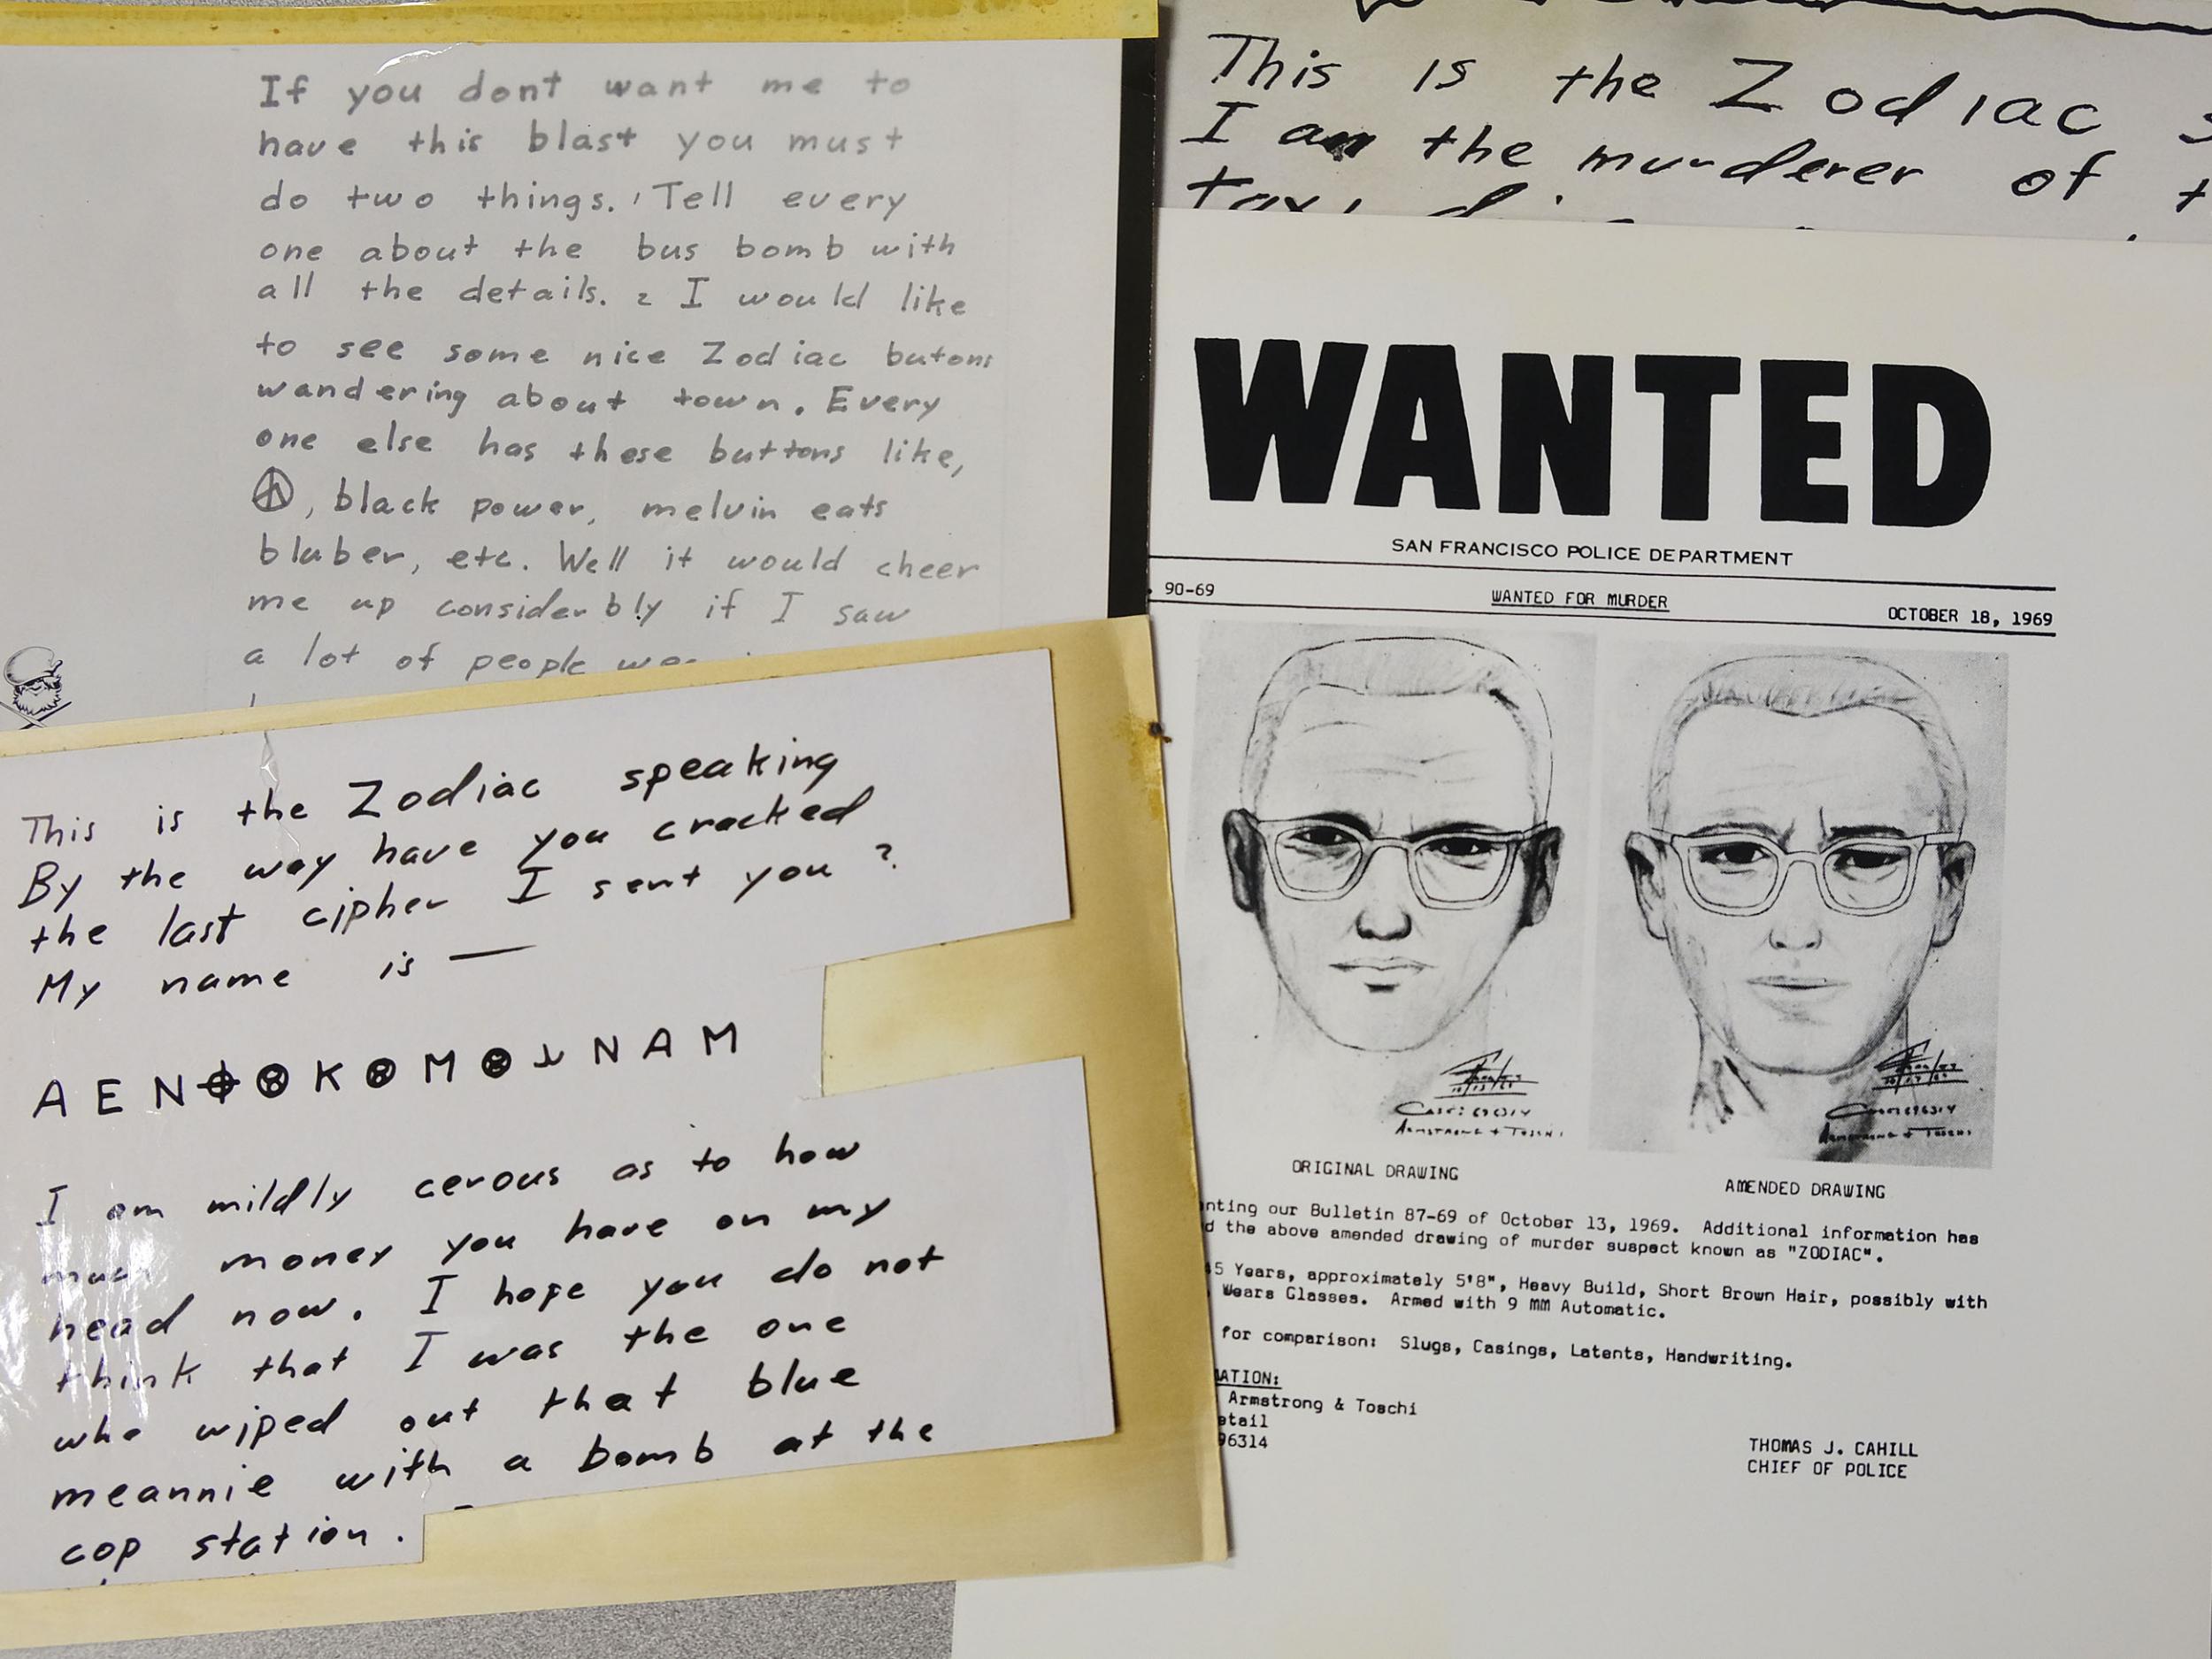 The FBI just responded after investigators claimed to have cracked the zodiac killer case